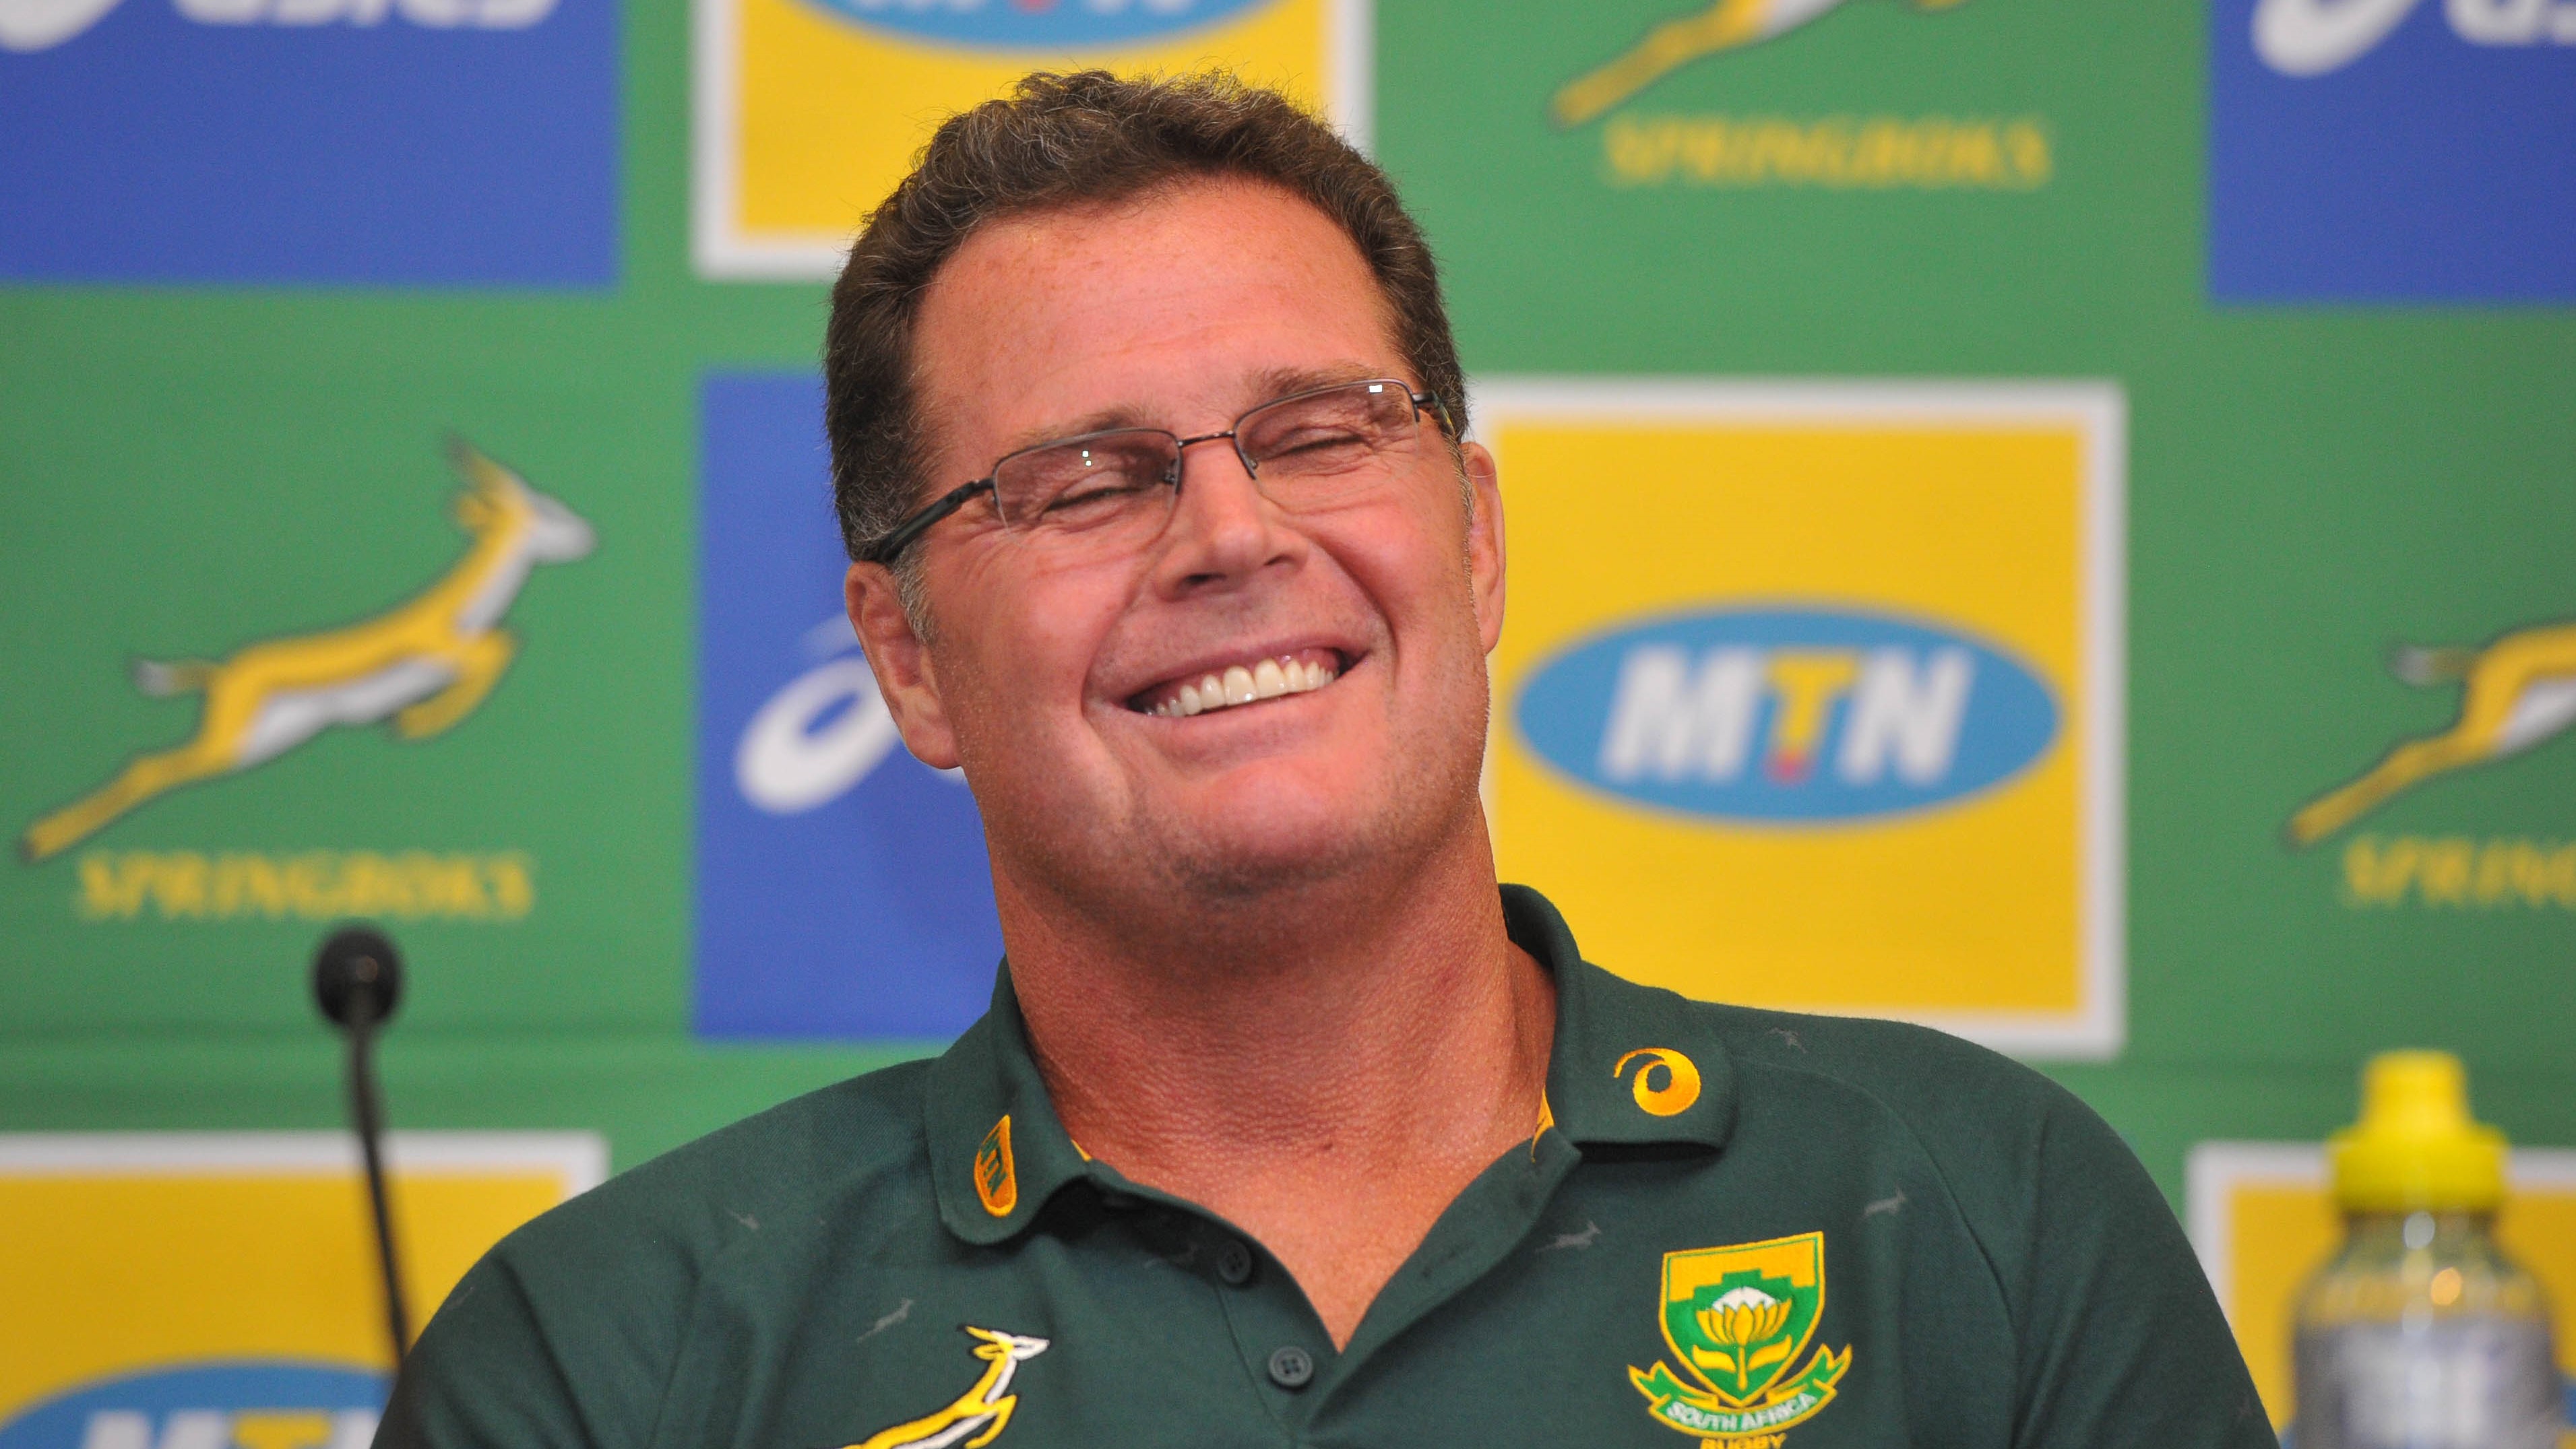 Rassie Erasmus during the Springboks Press Conference on 24 January 2020 at Southern Sun Hotel, Pretoria , Pic Sydney Mahlangu/BackpagePix